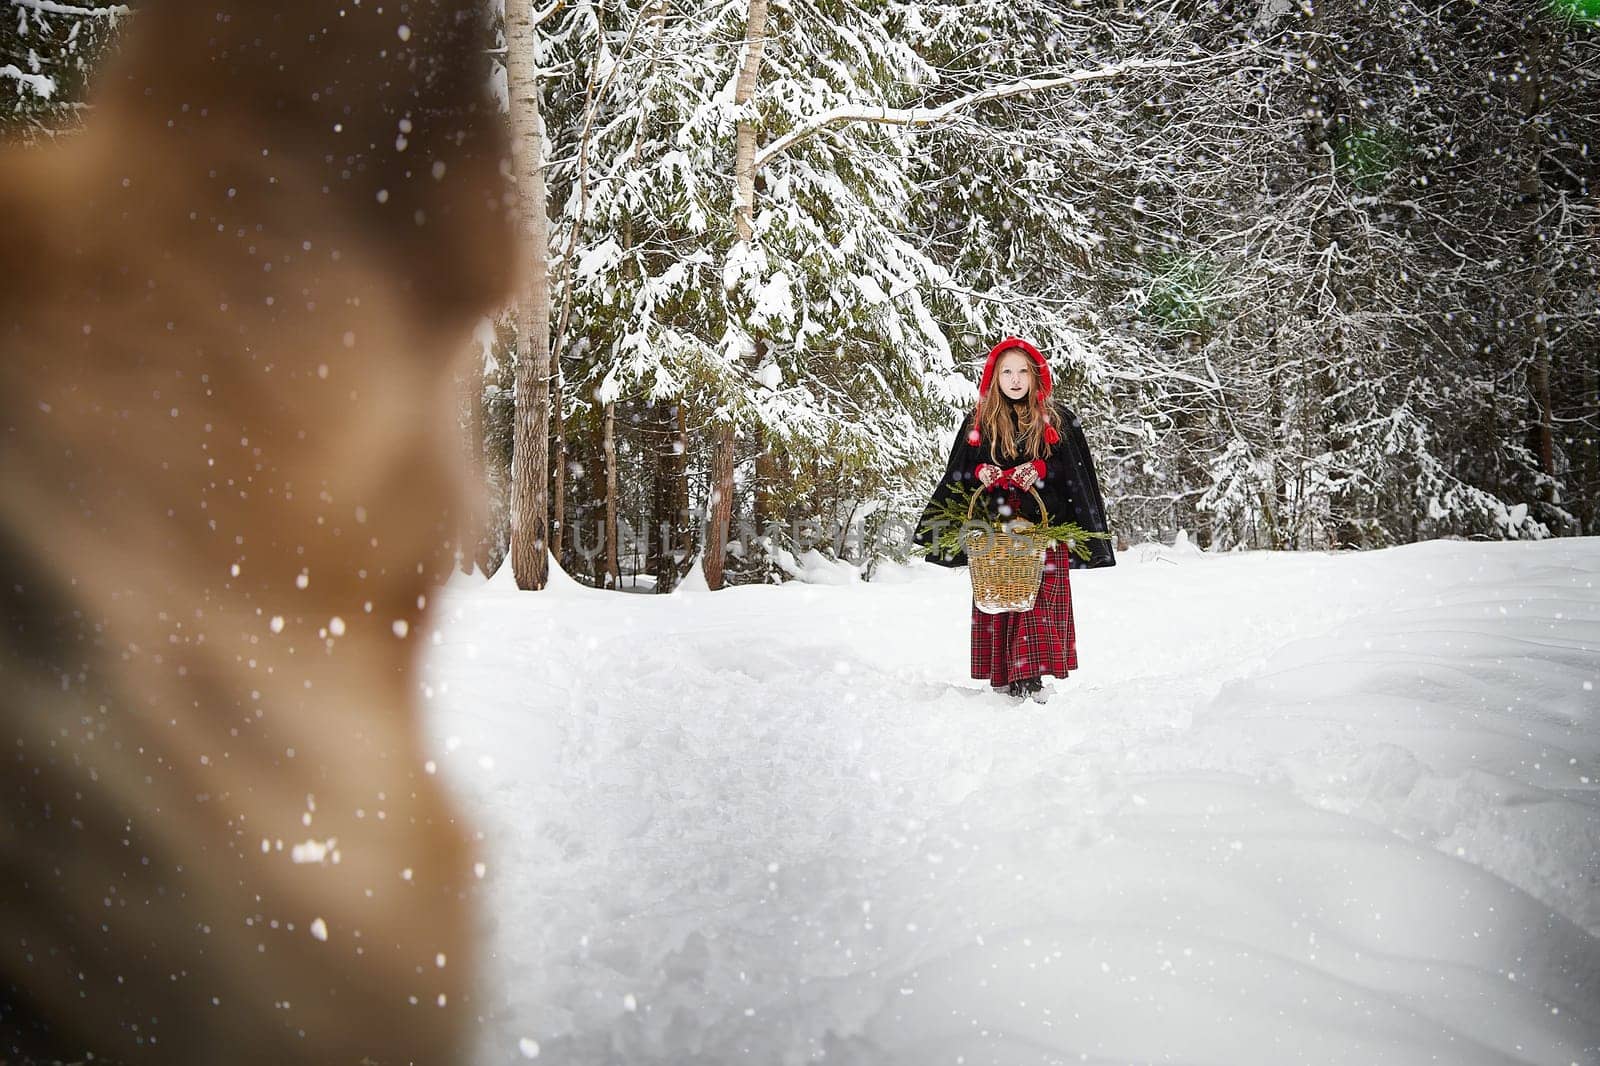 Meeting of Cute little girl in red cap or hat and black coat with basket of green fir branches and big dog shepherd as wolf in snow forest on a cold winter day. Fun and fairytale on photo shoot